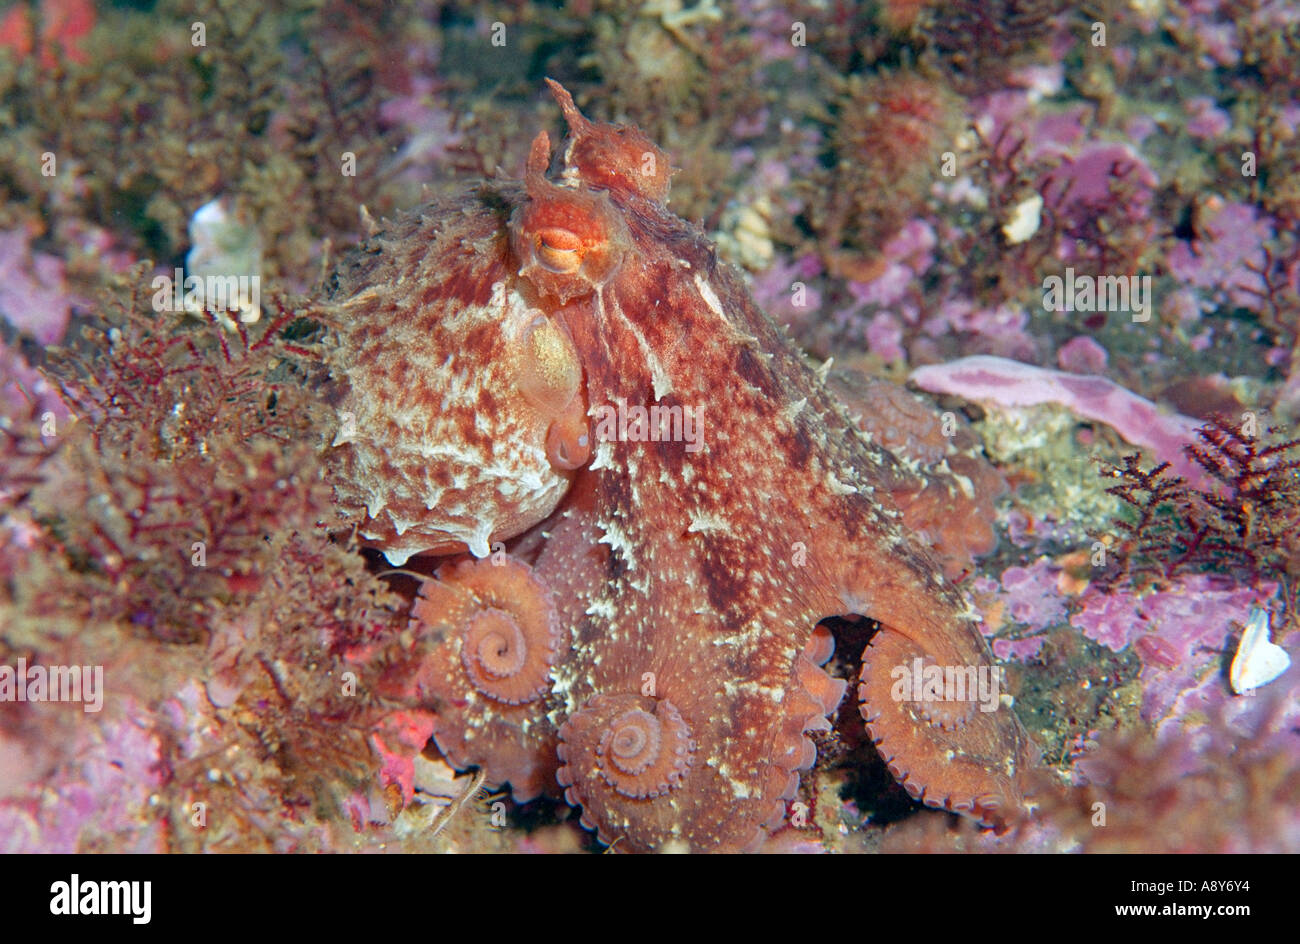 Small specimen of Giant North Pacific octopus sitting on the bottom. Species name is Octopus dofleini -a largest octopus species Stock Photo